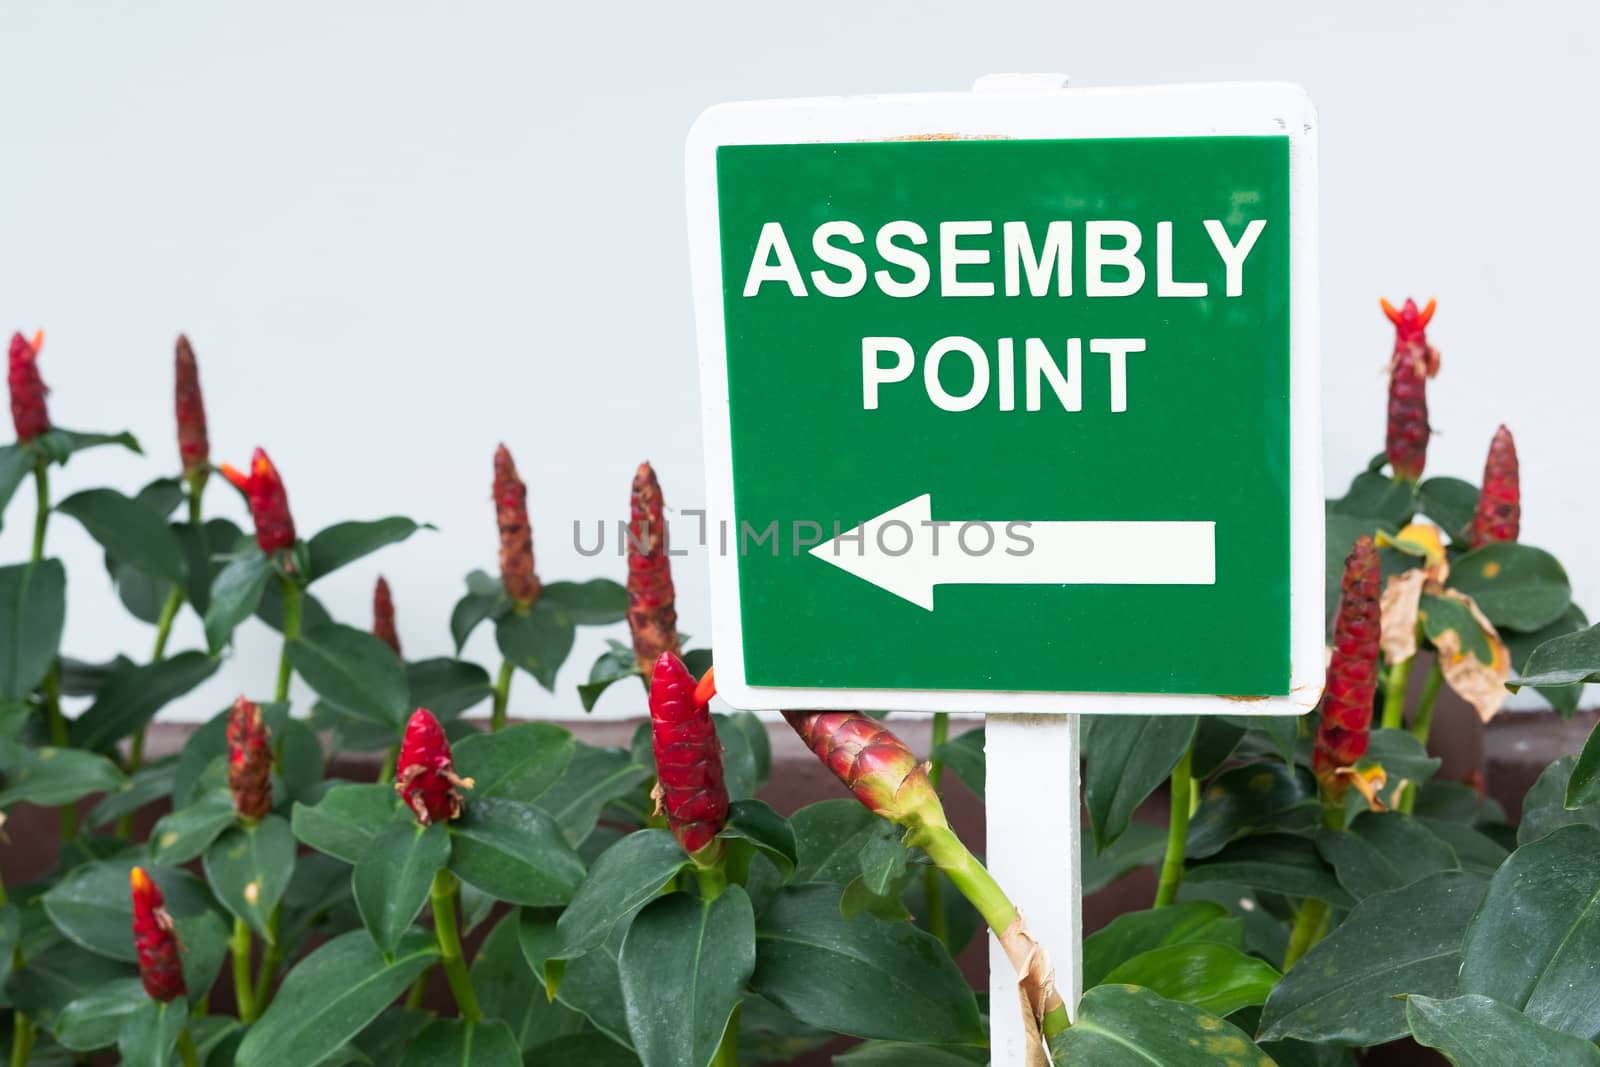 Assembly point in green color signpost in the garden nature background. Emergency assembly point sign board